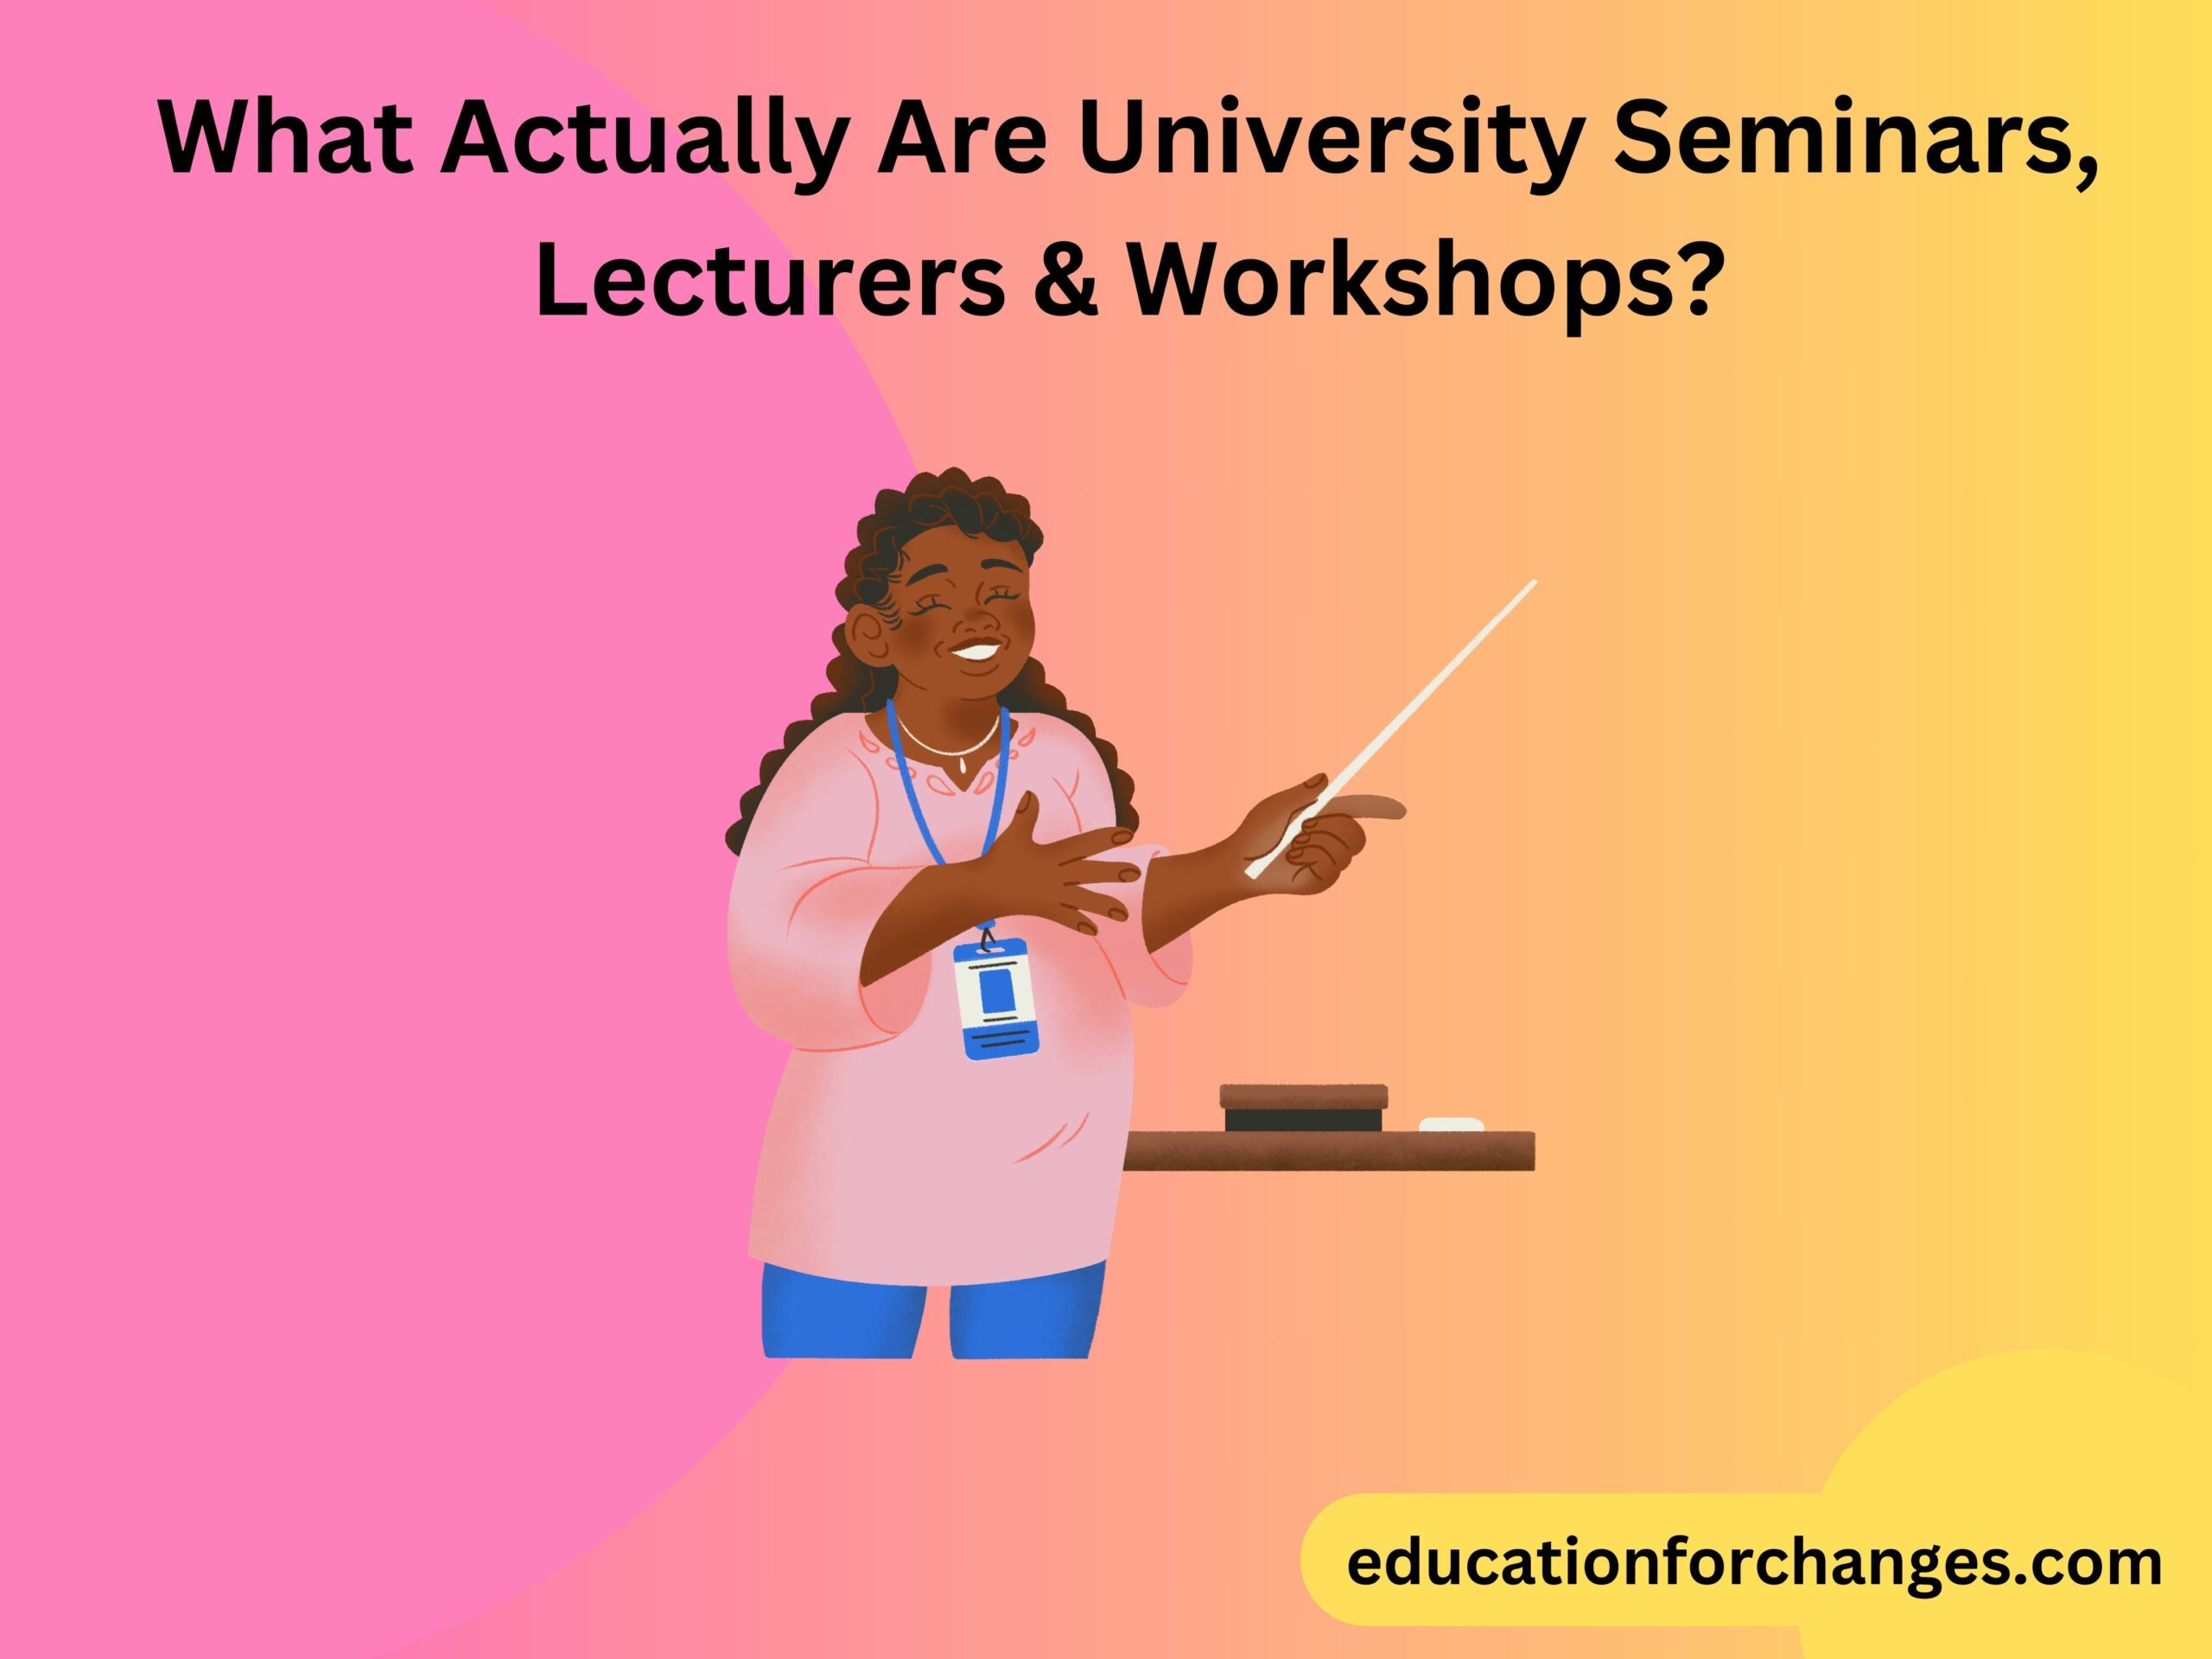 What Actually Are University Seminars, Lecturers & Workshops